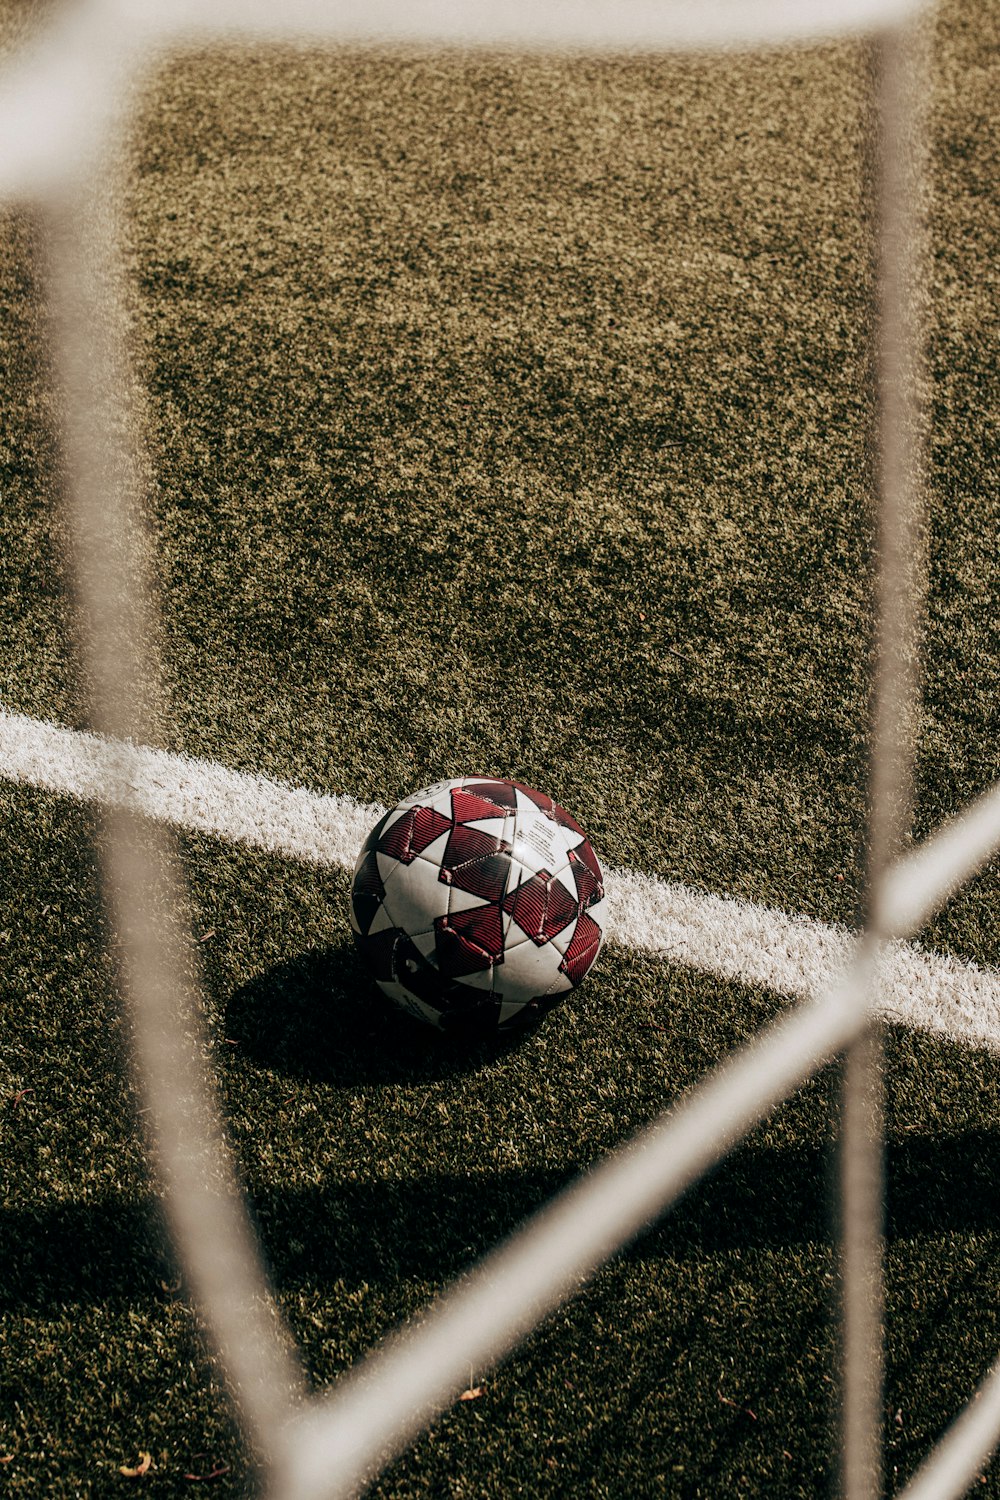 a soccer ball sitting on top of a soccer field